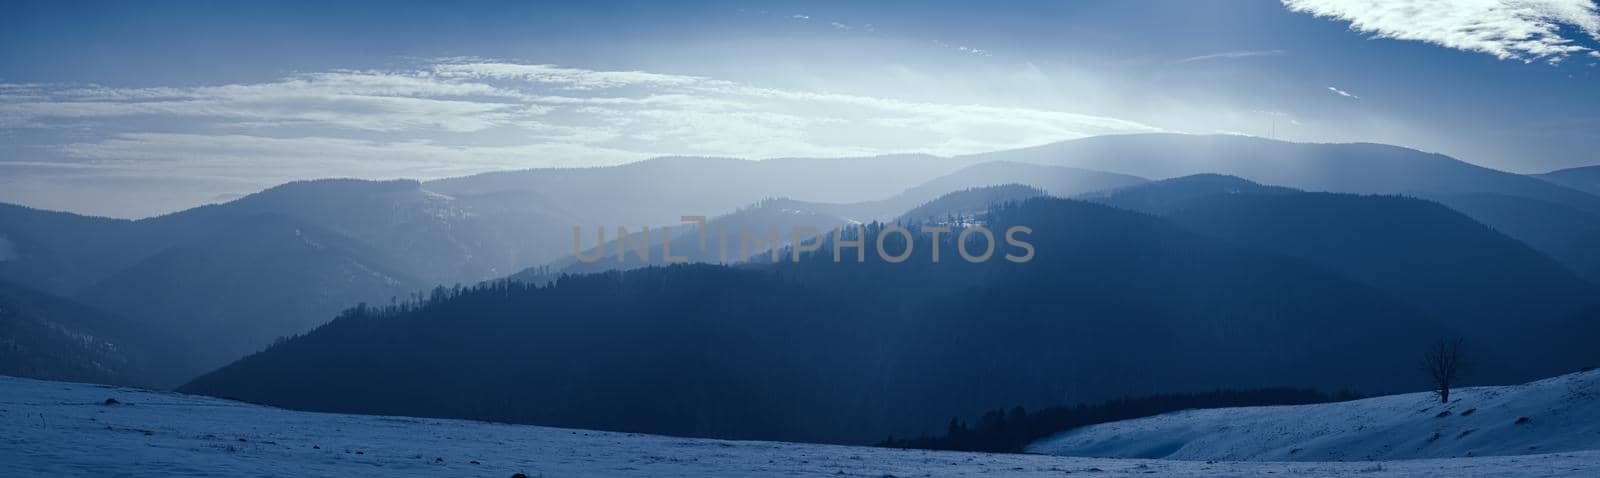 sun over the winter mountains with snow, Cindrel mountains, Paltinis, Romania by Roberto